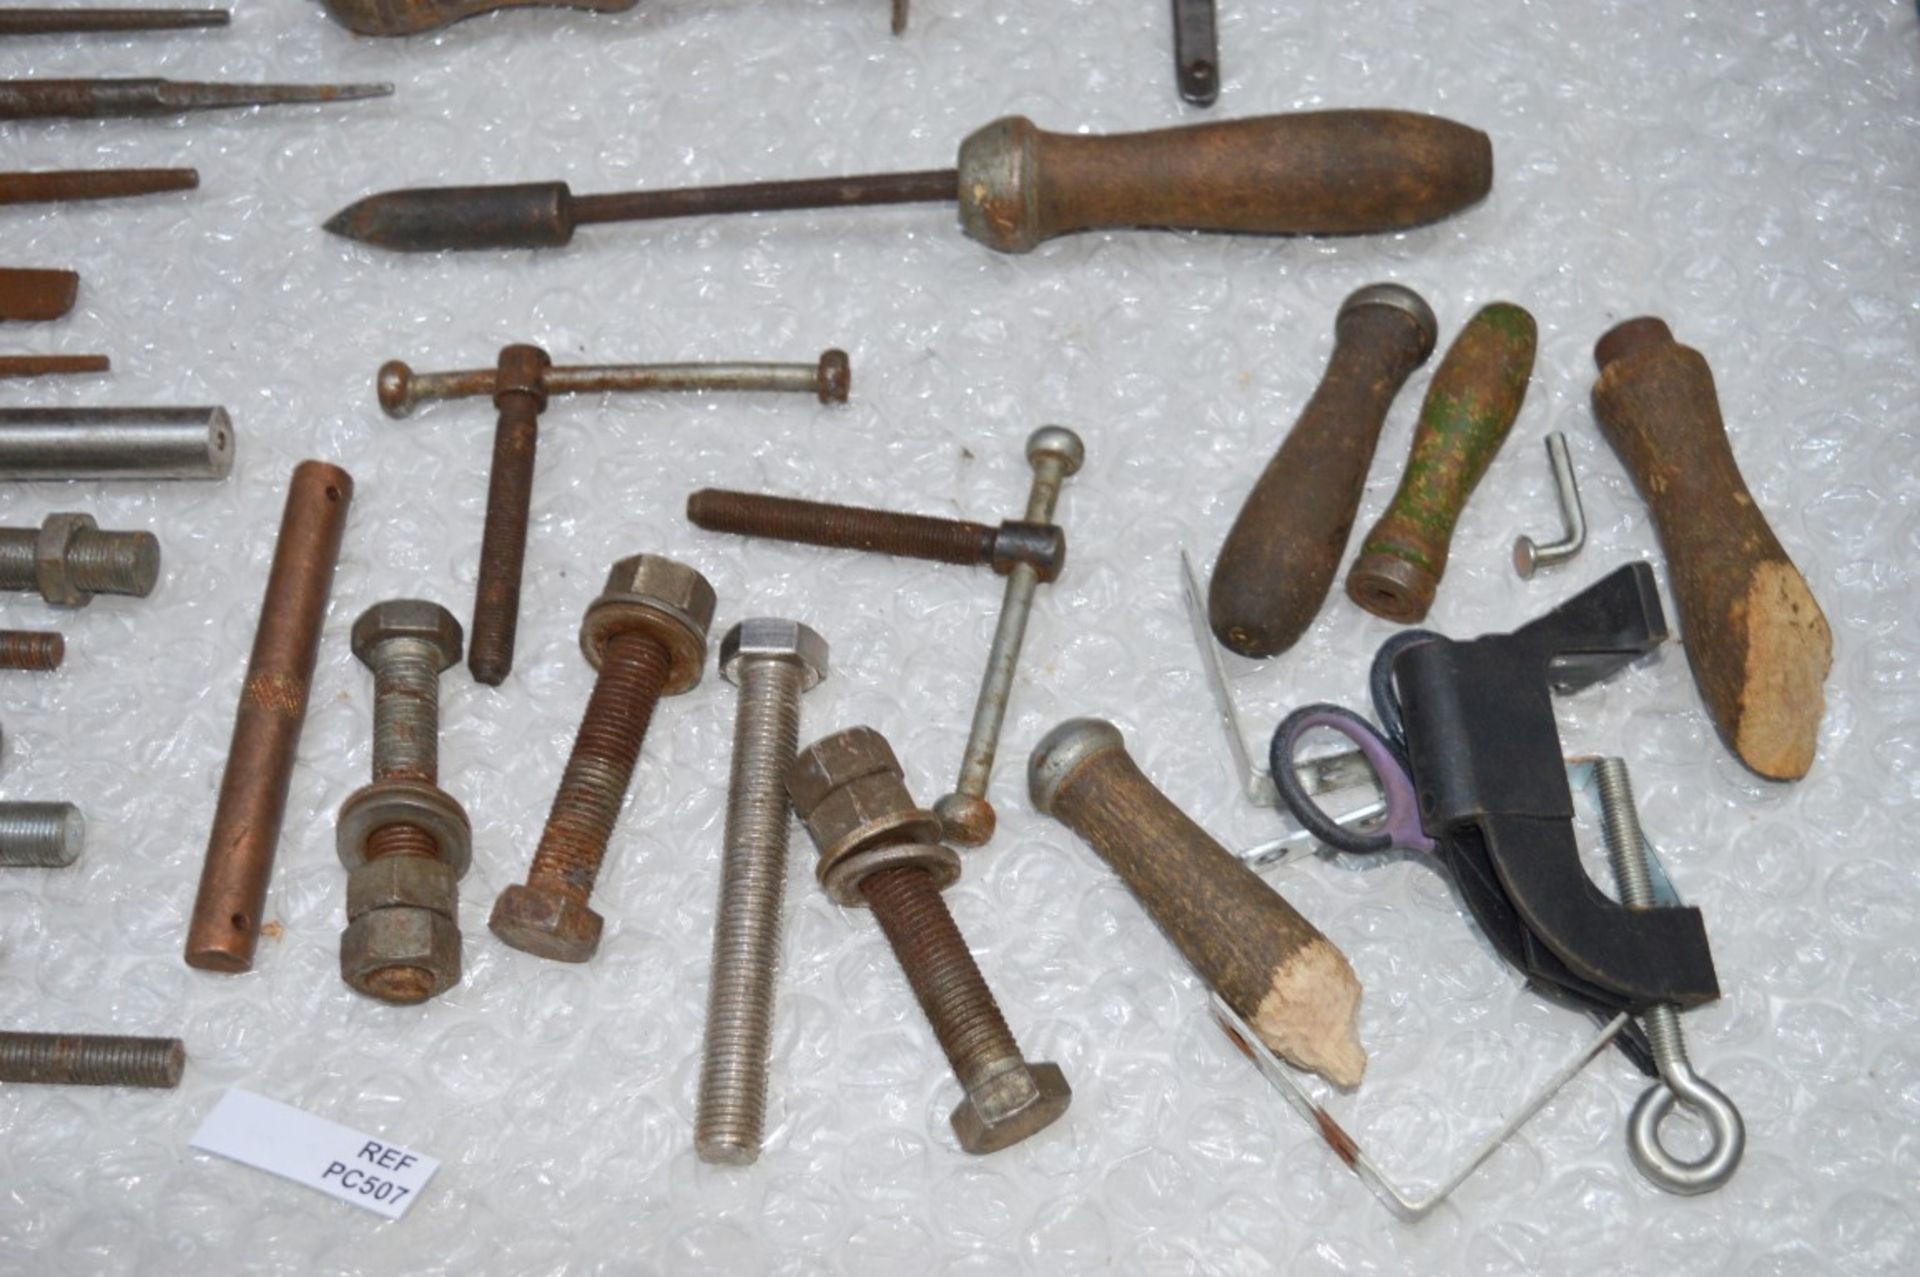 1 x Assorted Lot of Vintage Tools, Files, Rods and More - Includes More Than 30 Pieces Including - Image 12 of 31